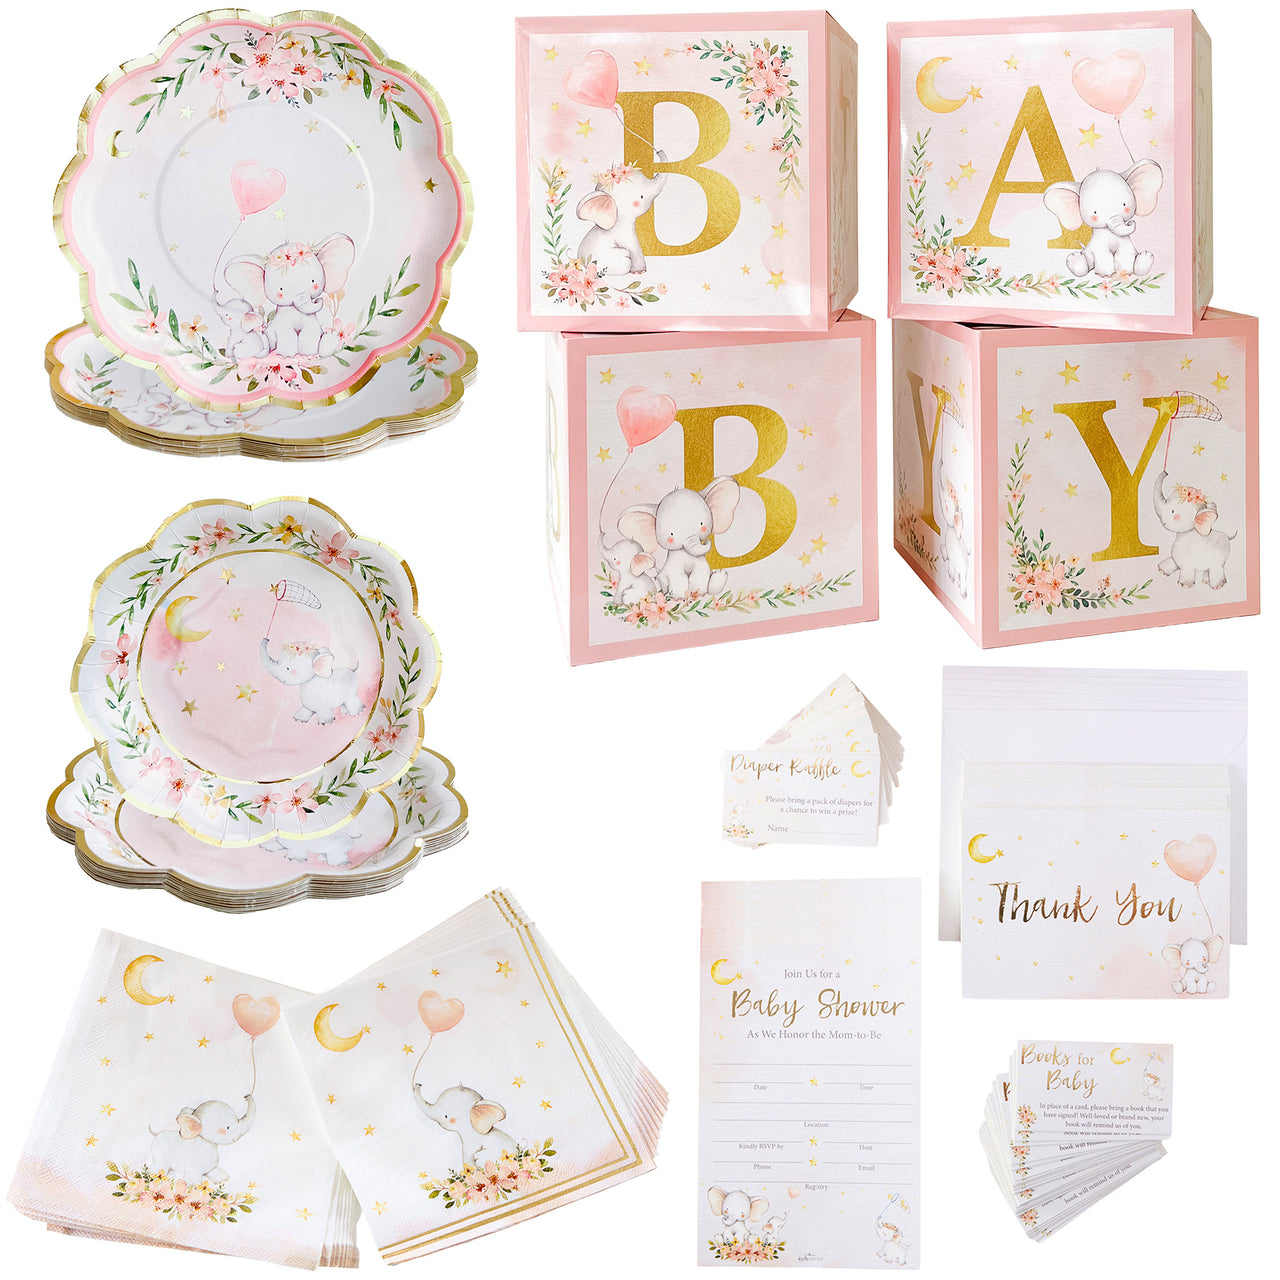 Pink Elephant Baby Shower 91 pc Party Kit